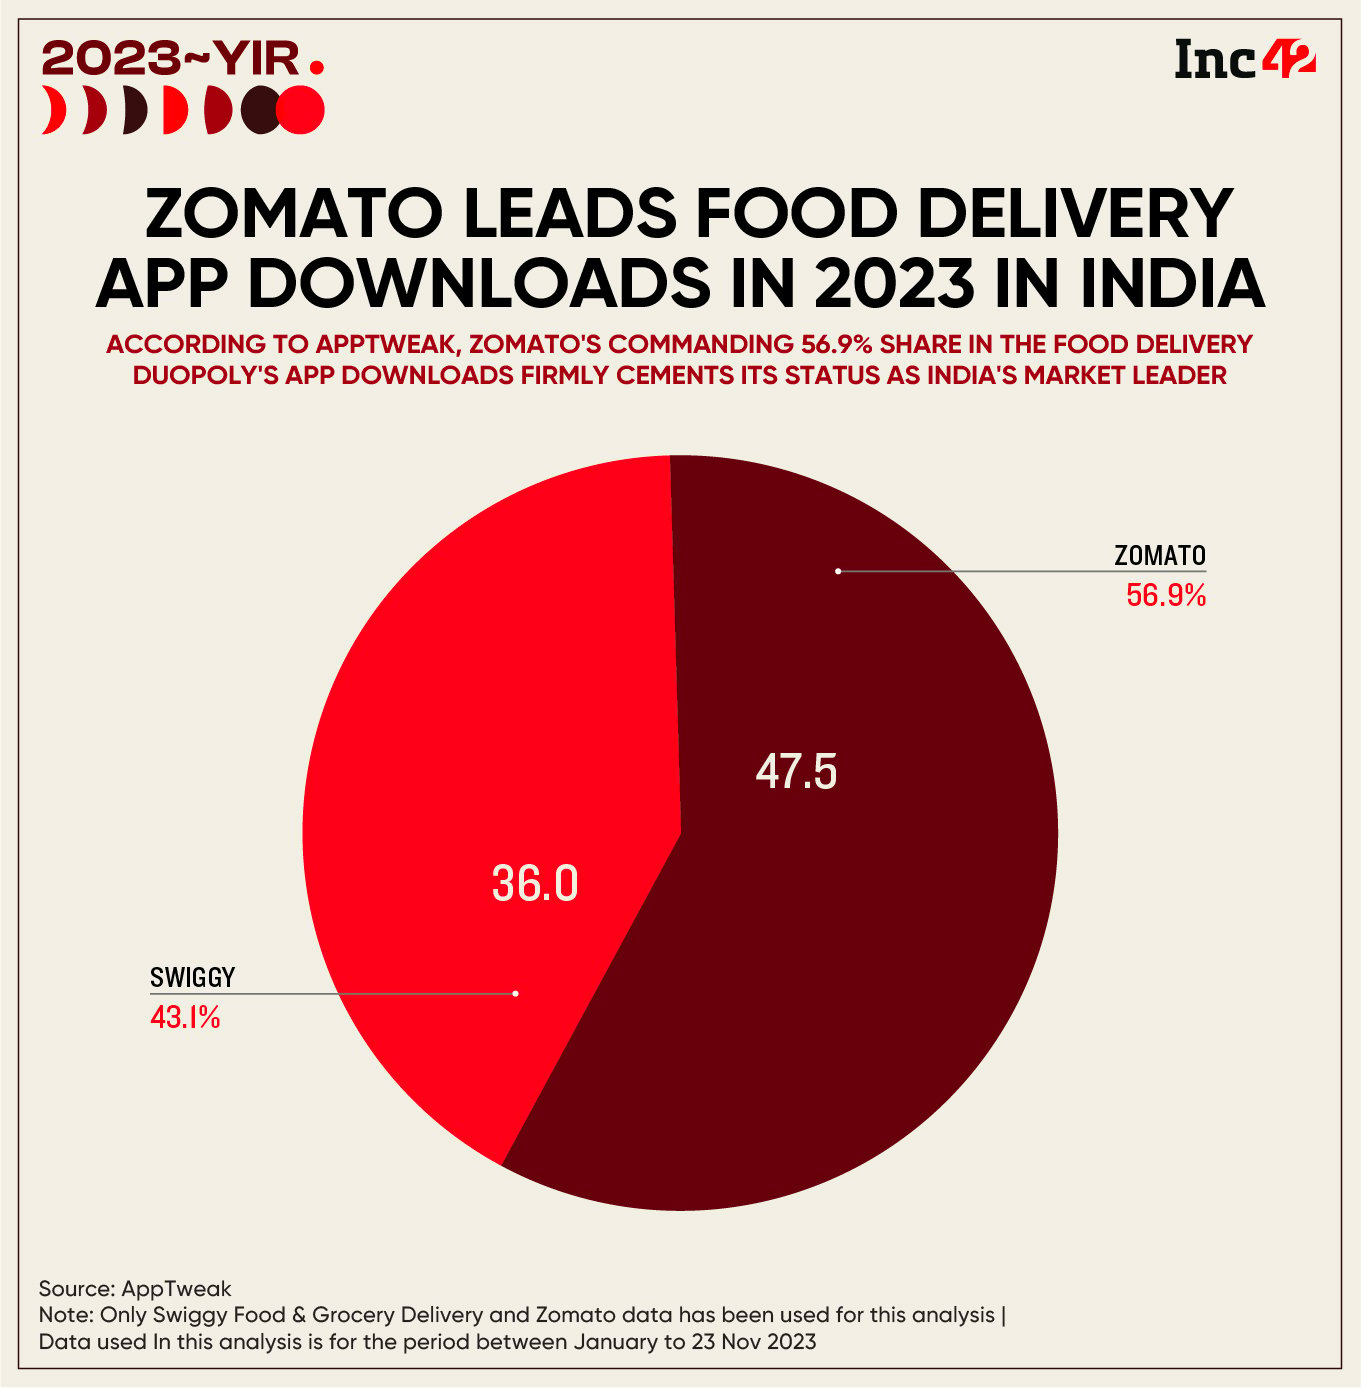 Zomato-Swiggy War Is On: How The Duopoly Fared In 2023 & The Outlook For 2024 